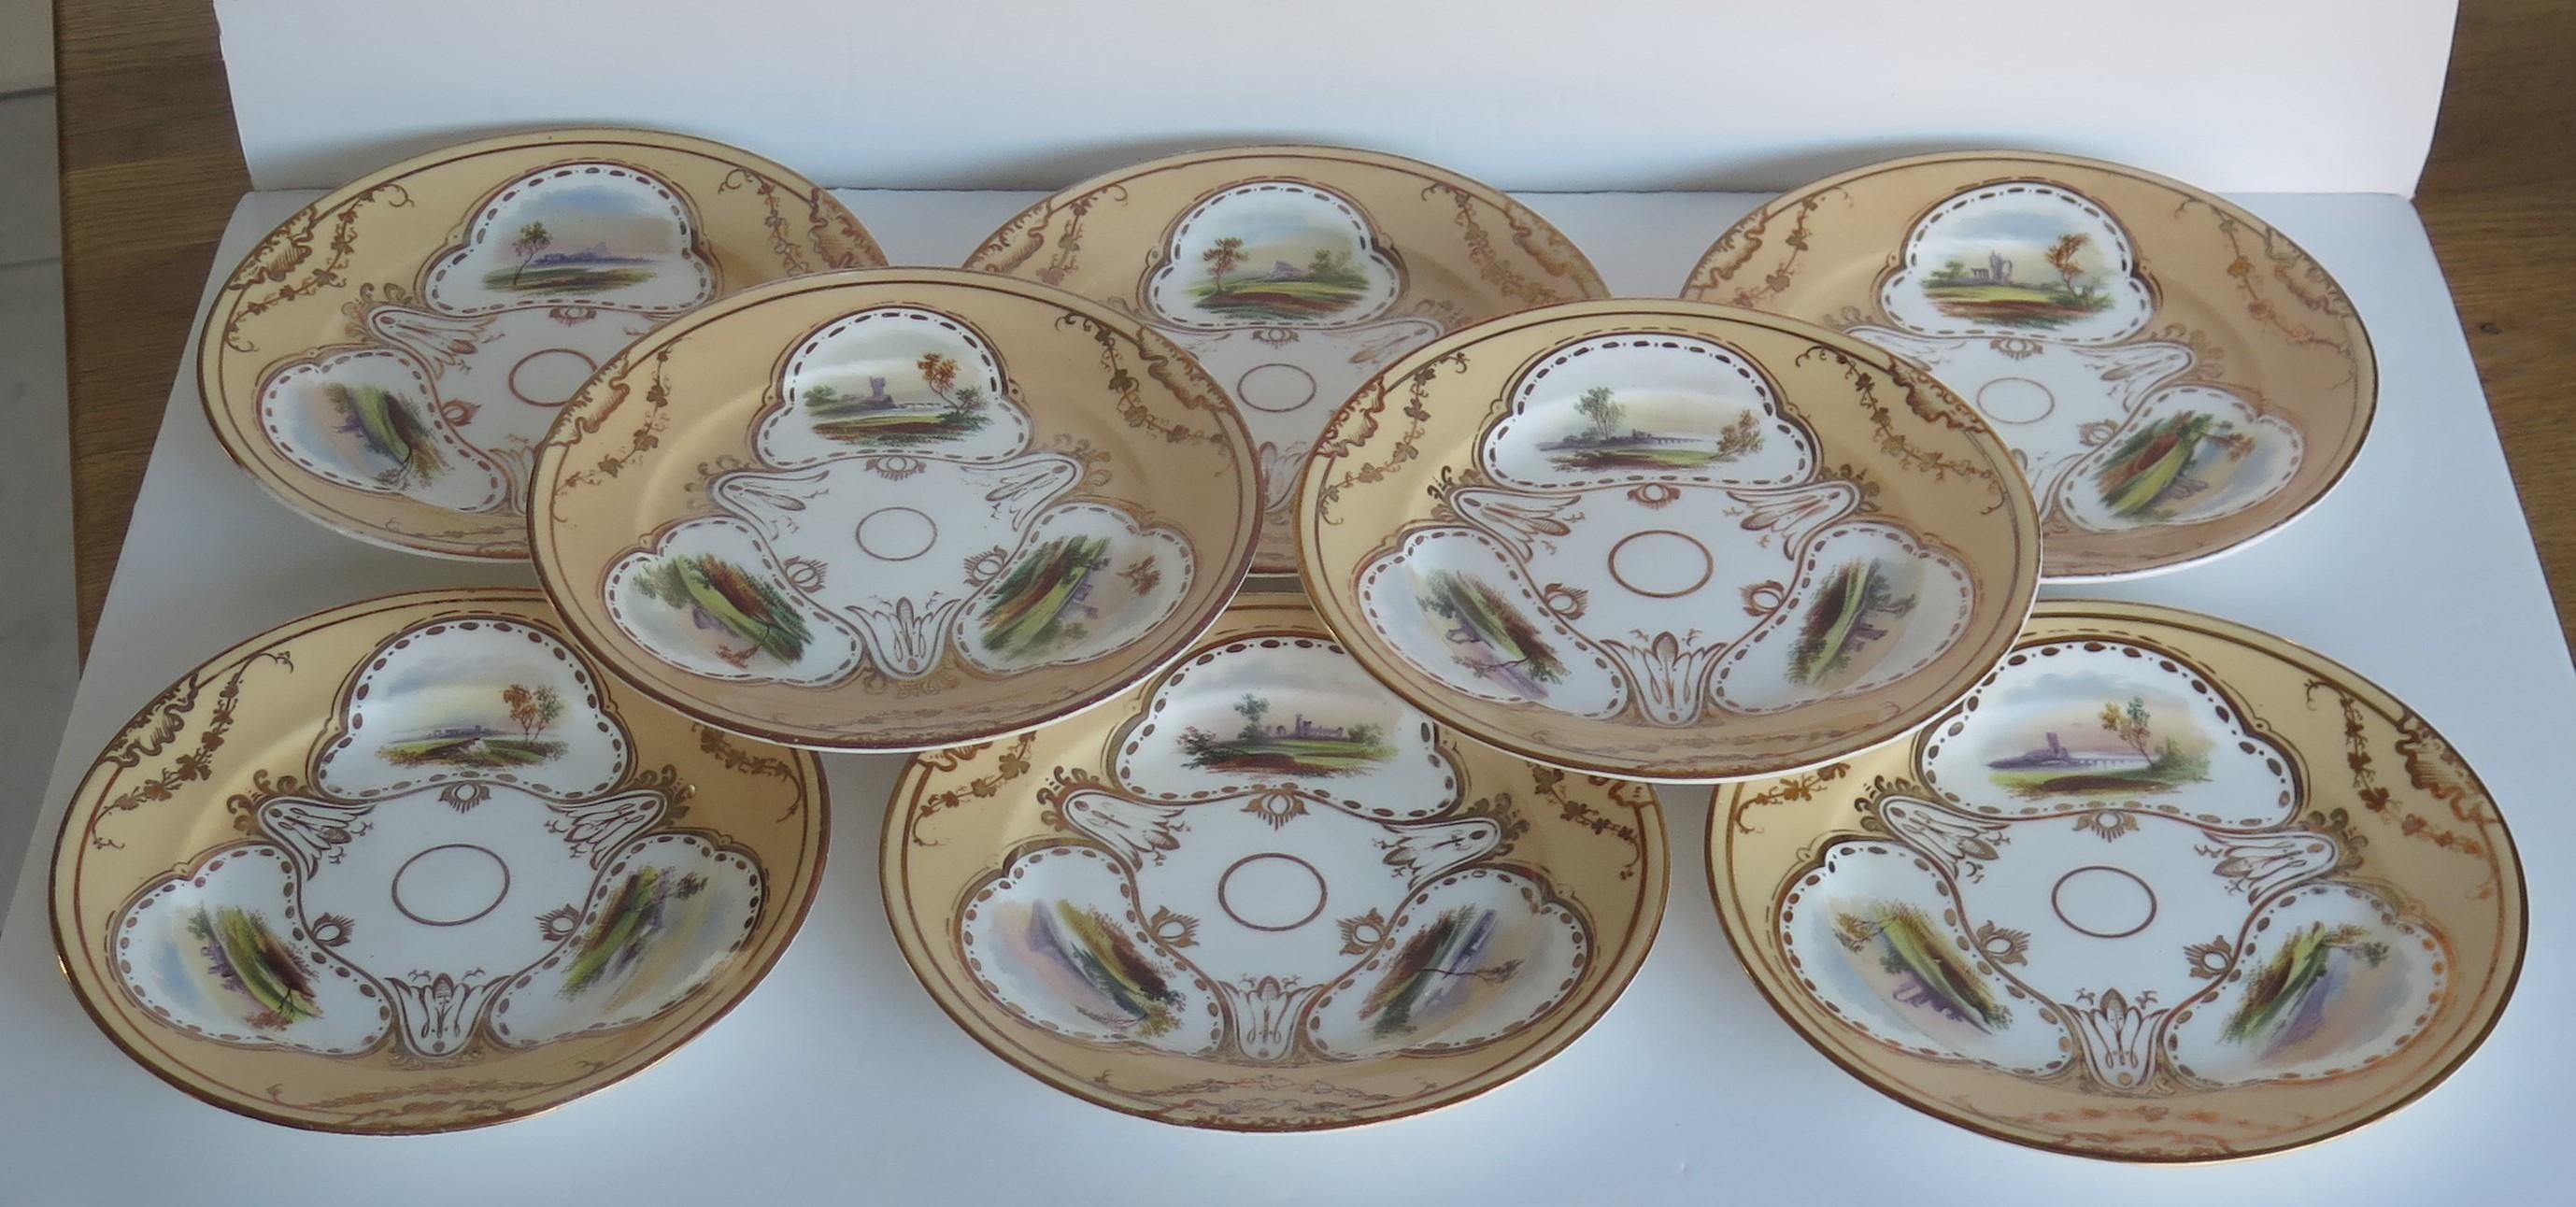 Hand-Painted Set of Ten Desert Plates by Rockingham porcelain Hand Painted Scenes, Circa 1825 For Sale